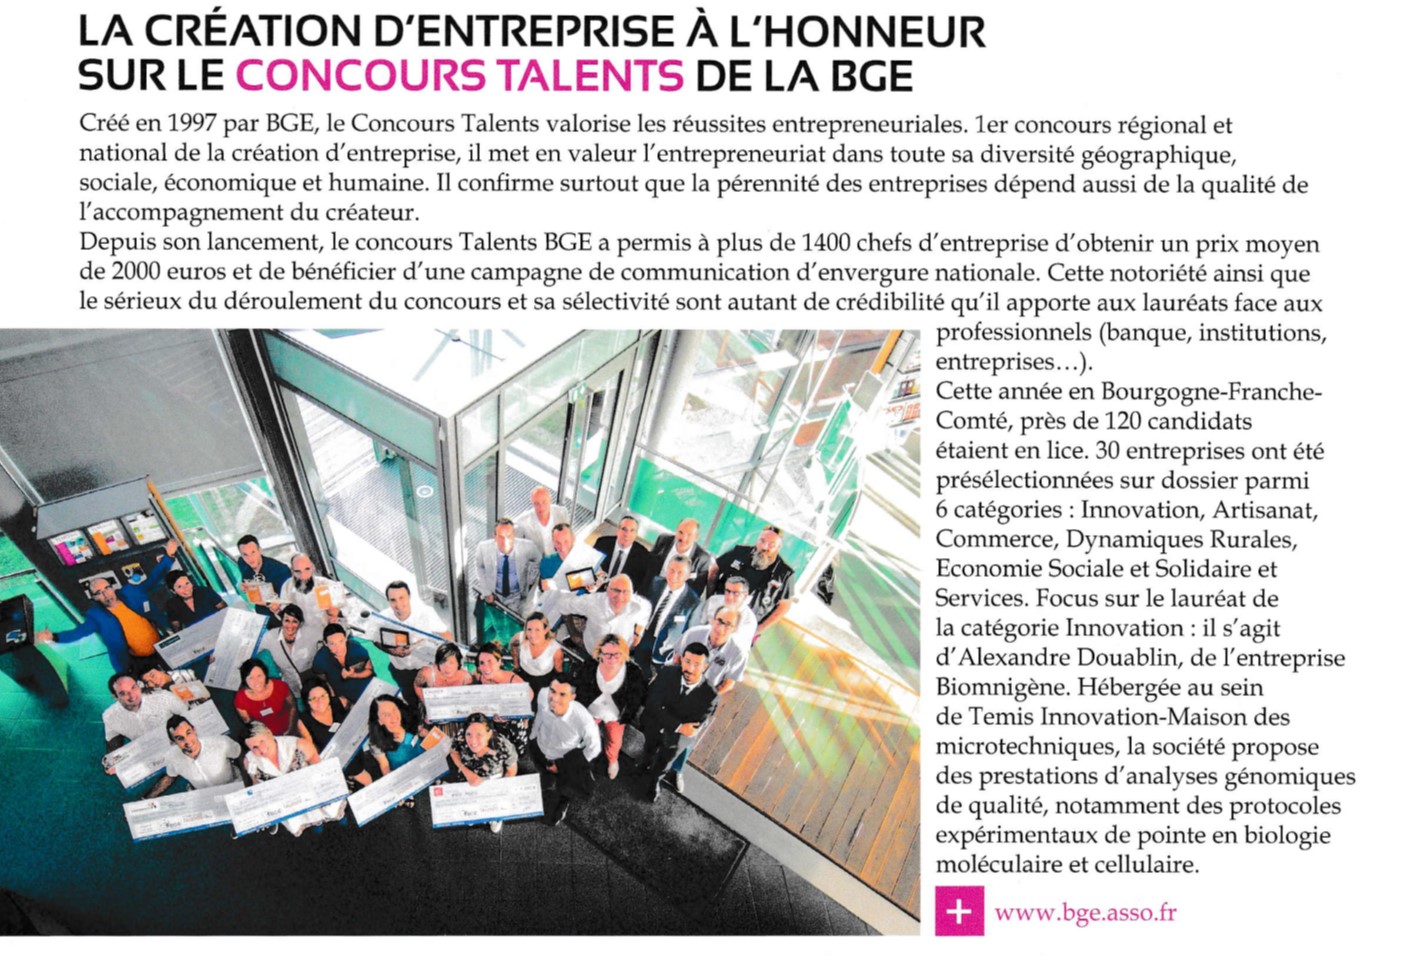 Article published in Temis News n°59